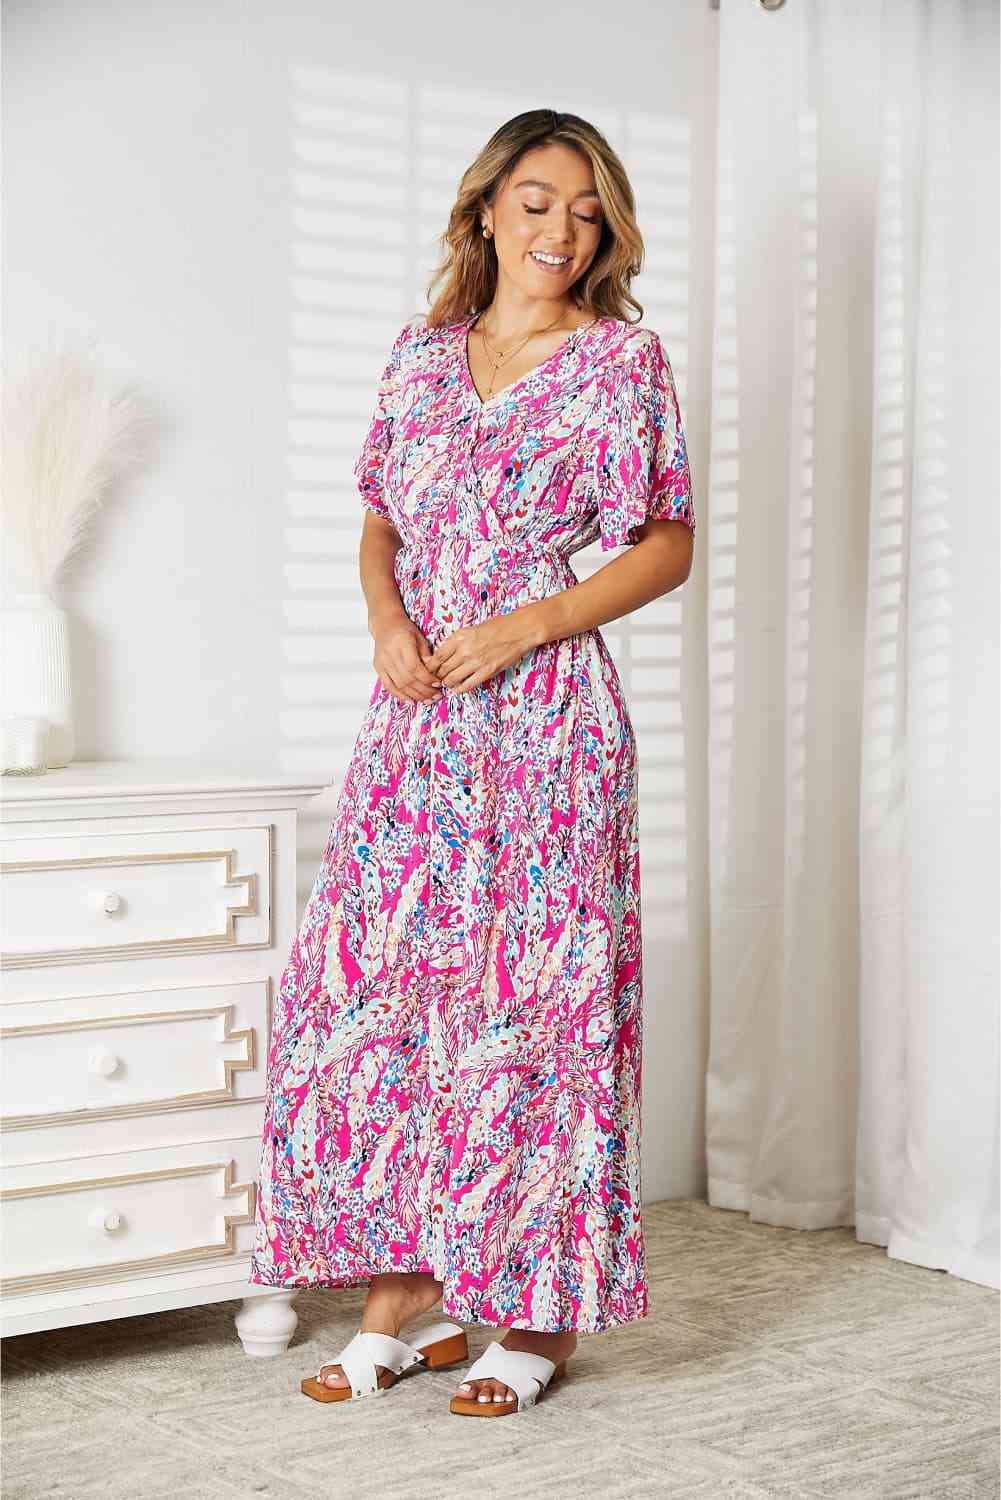 Double Take Multicolored V-Neck Maxi Dress - Wildflower Hippies